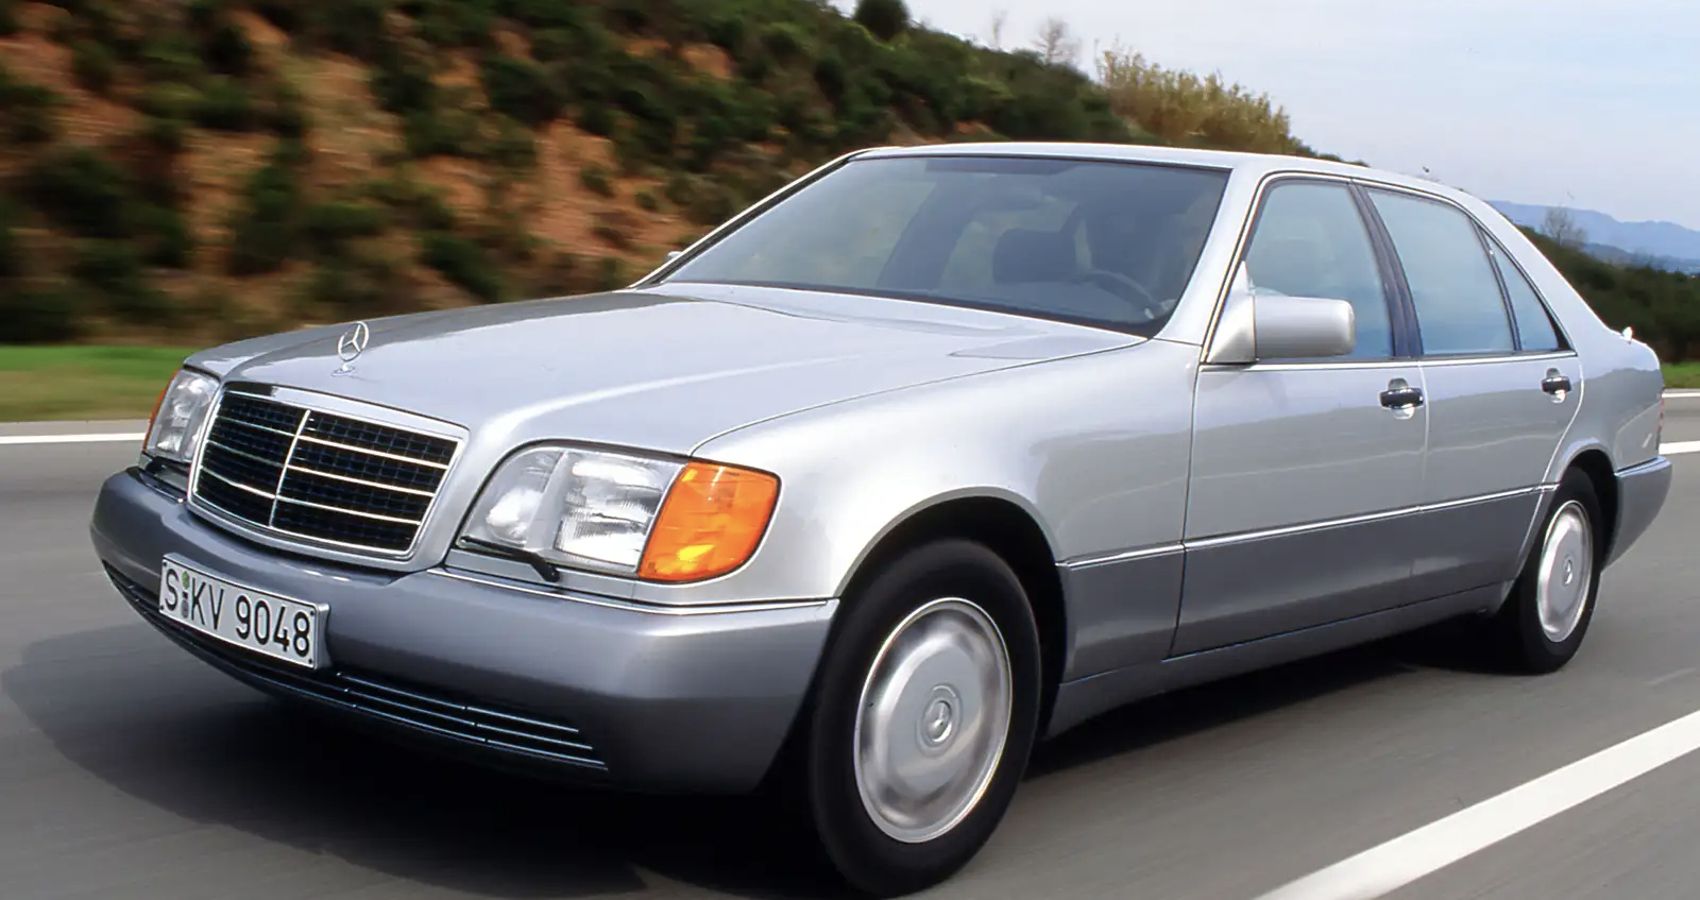 5 Classic German Cars That Were Seriously Overengineered (5 Modern Ones That Aren’t)